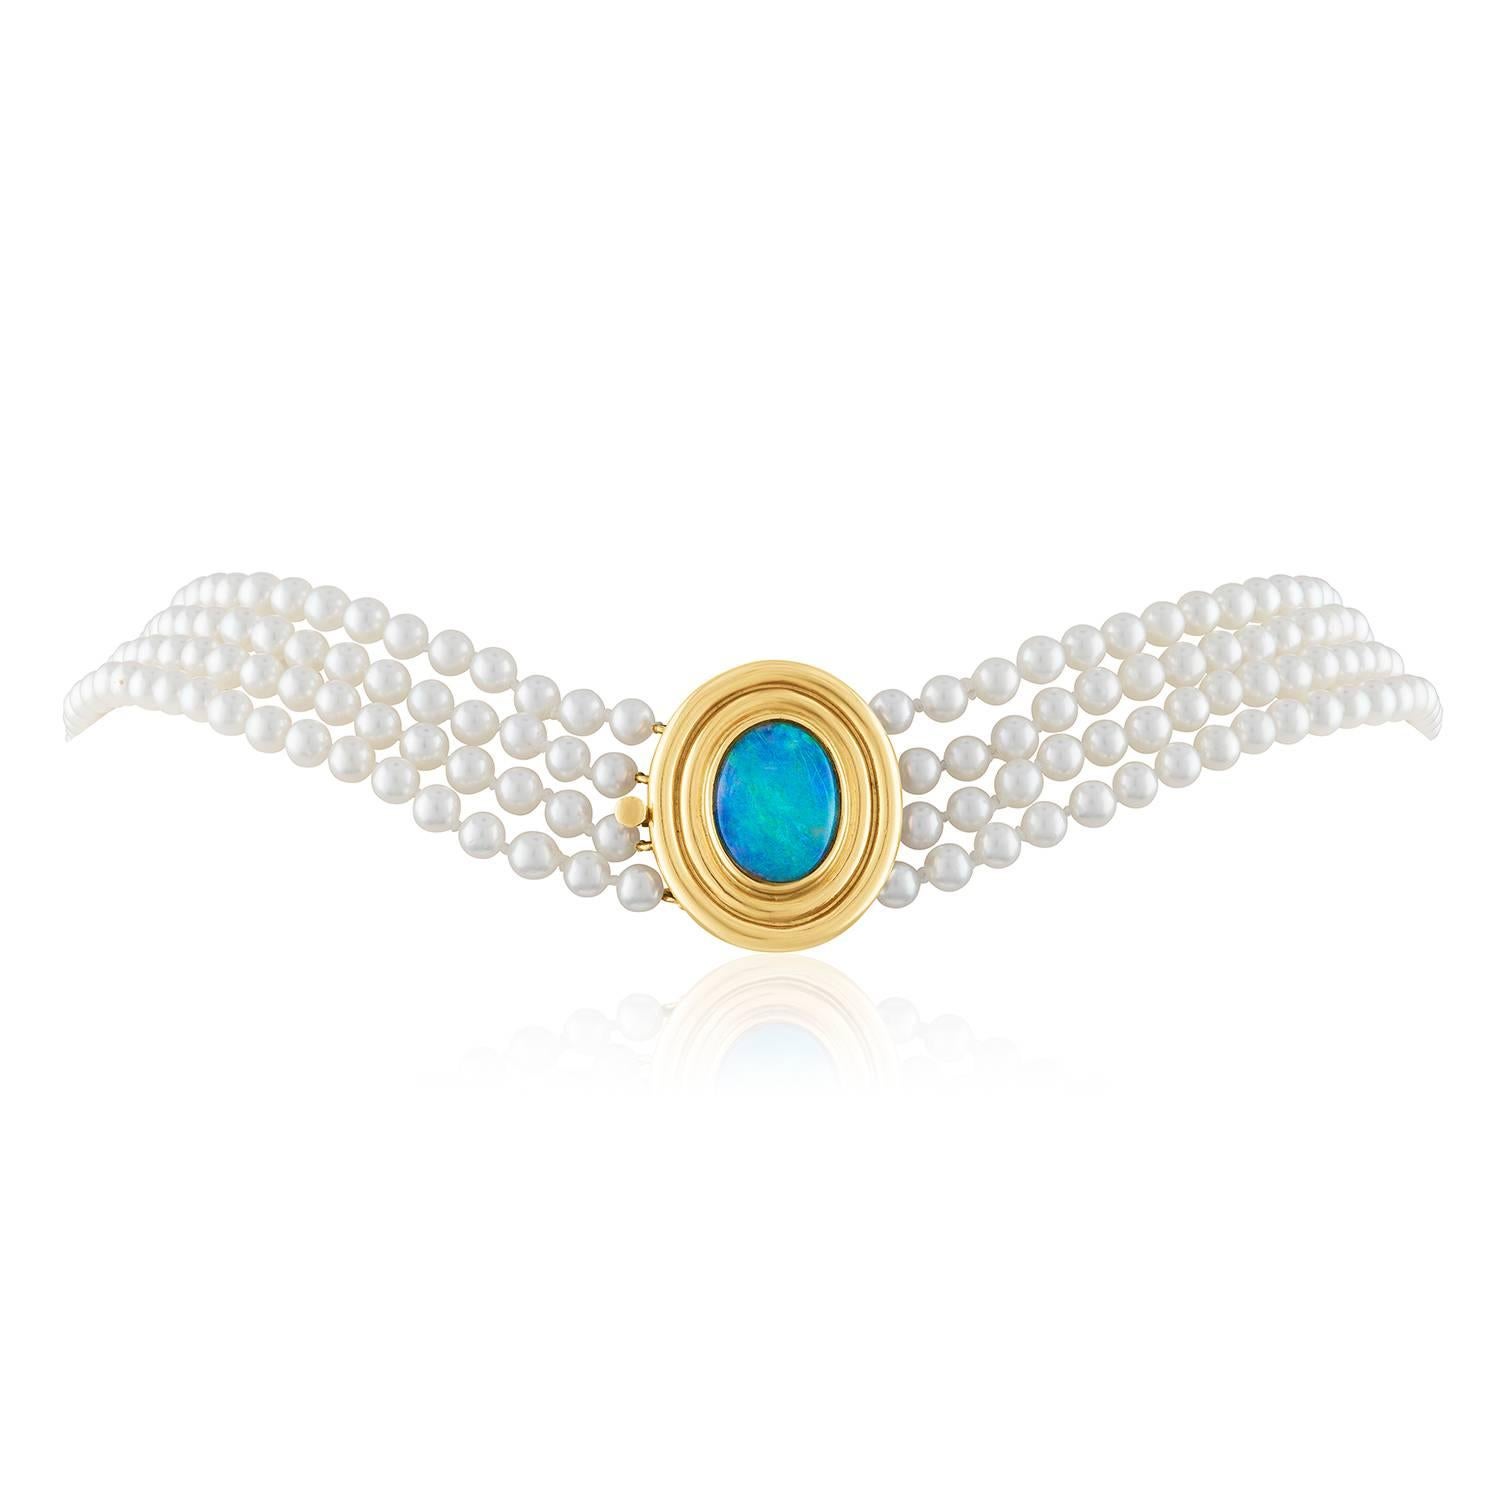 Very Classic 4 Strand Pearl Necklace
The clasp is 14K Yellow Gold
The pearls measure 4.0mm
The pearls are Cultured Akoya Pearls.
The clasp has an Australian Opal
The necklace is 16.75